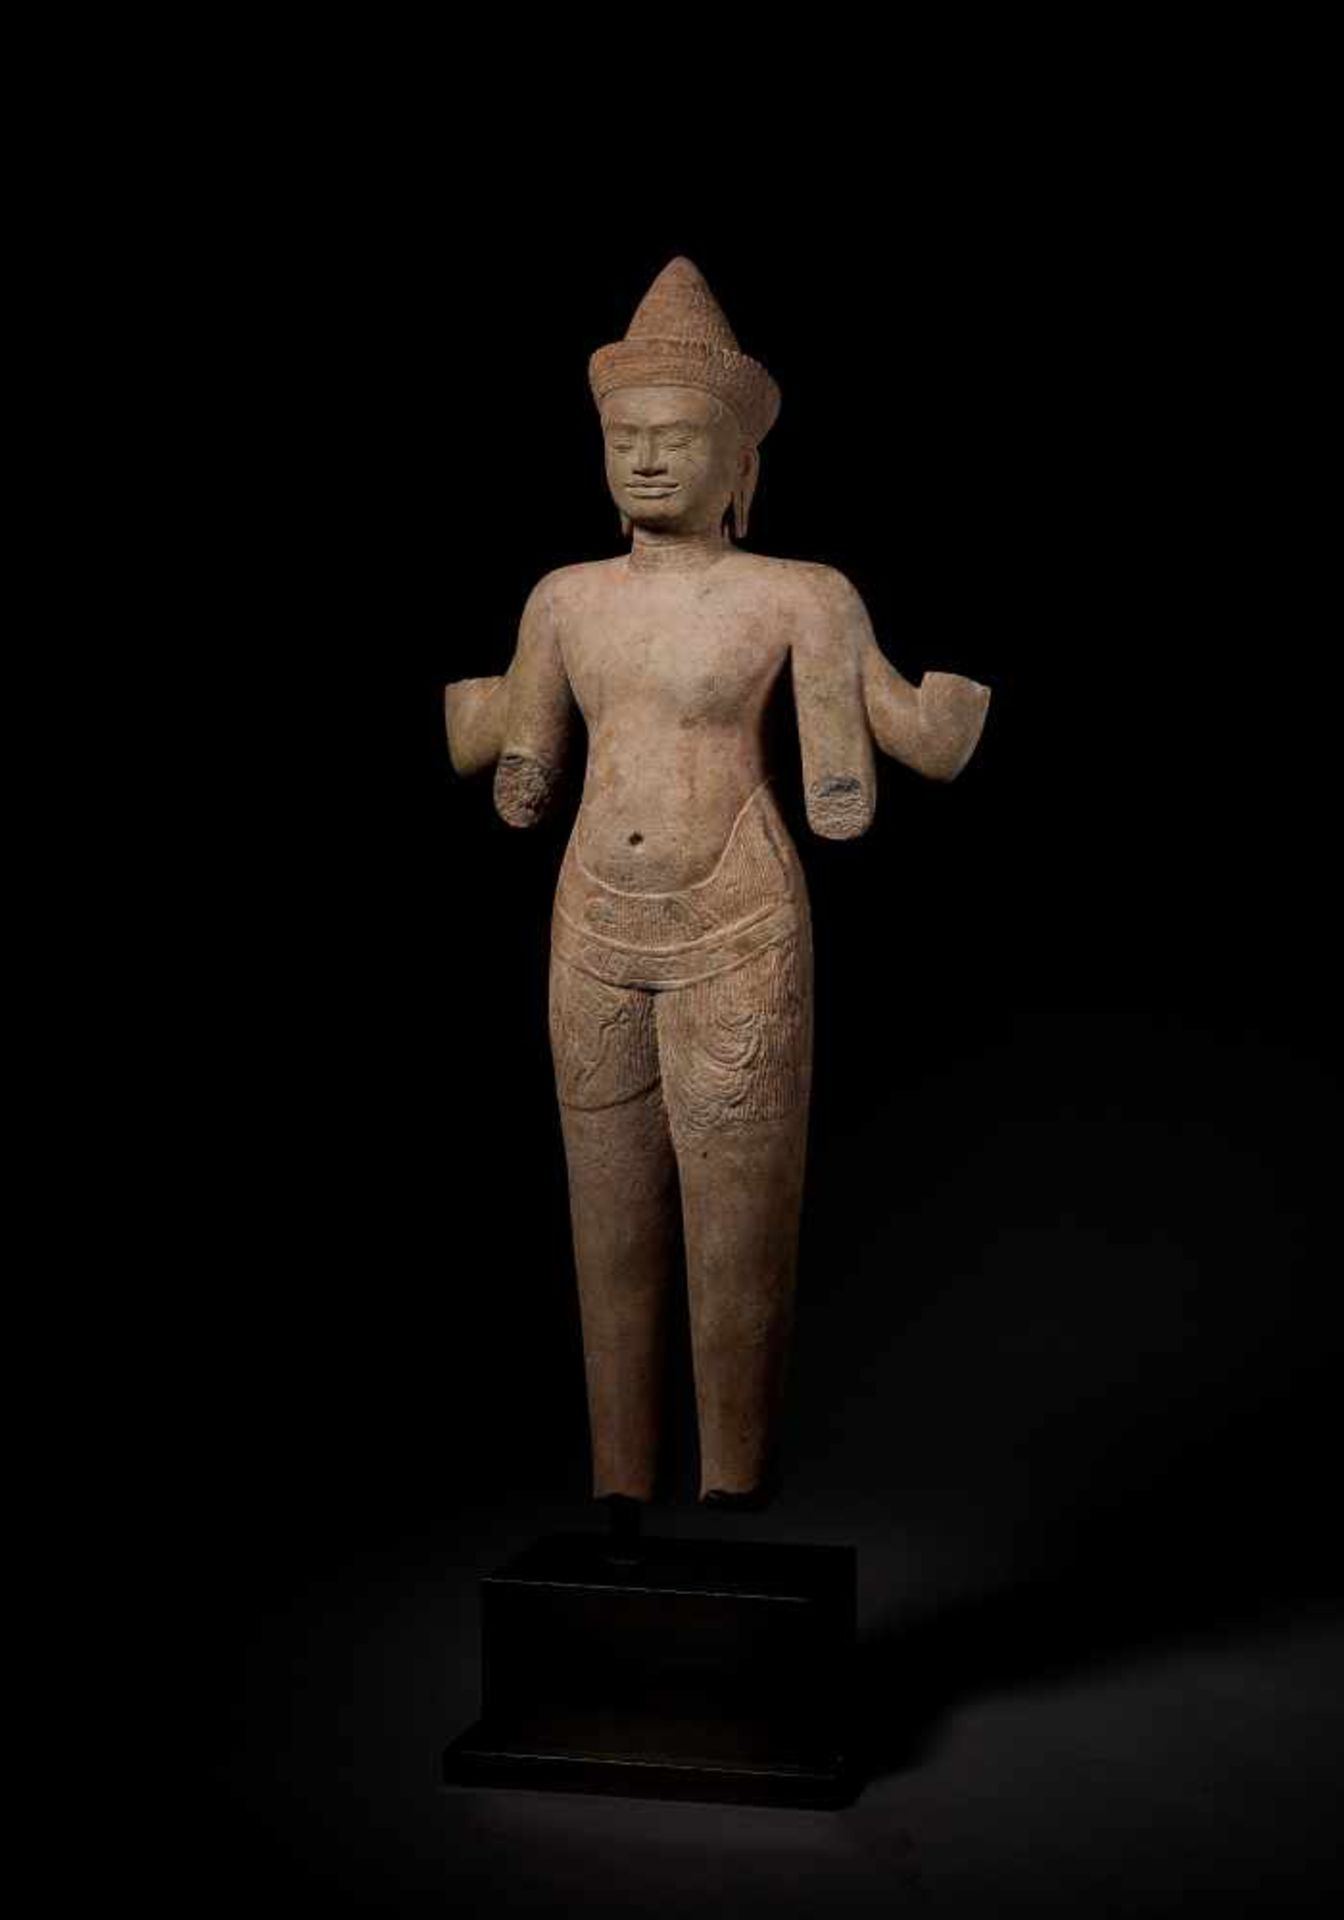 A STANDING VISHNU, BAPHUON, KHMER, 11TH CENTURY This important carved and incised sandstone